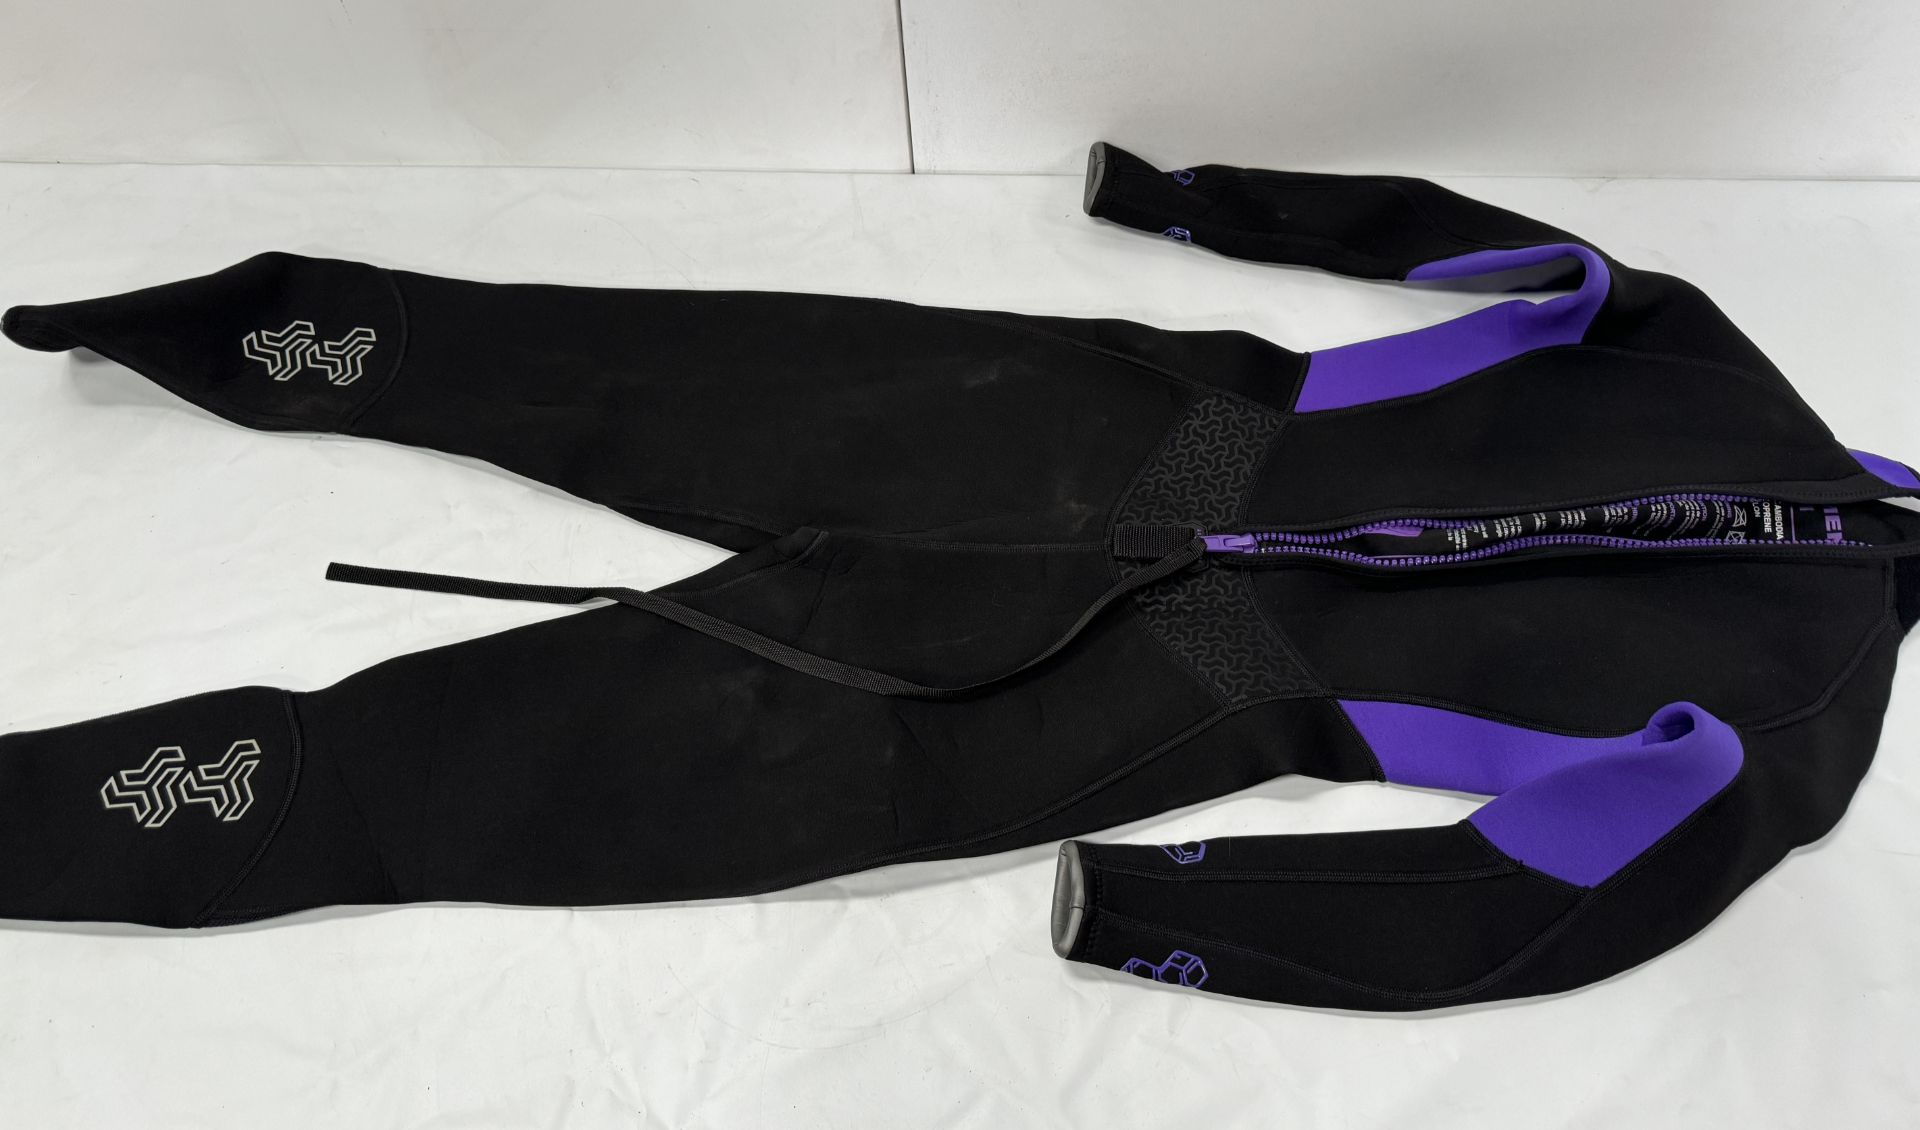 Kids Osprey Wetsuit, Aqua Lung Woman’s Wetsuit (Size M), Beuchat & Seac Wetsuits (Location: - Image 6 of 10